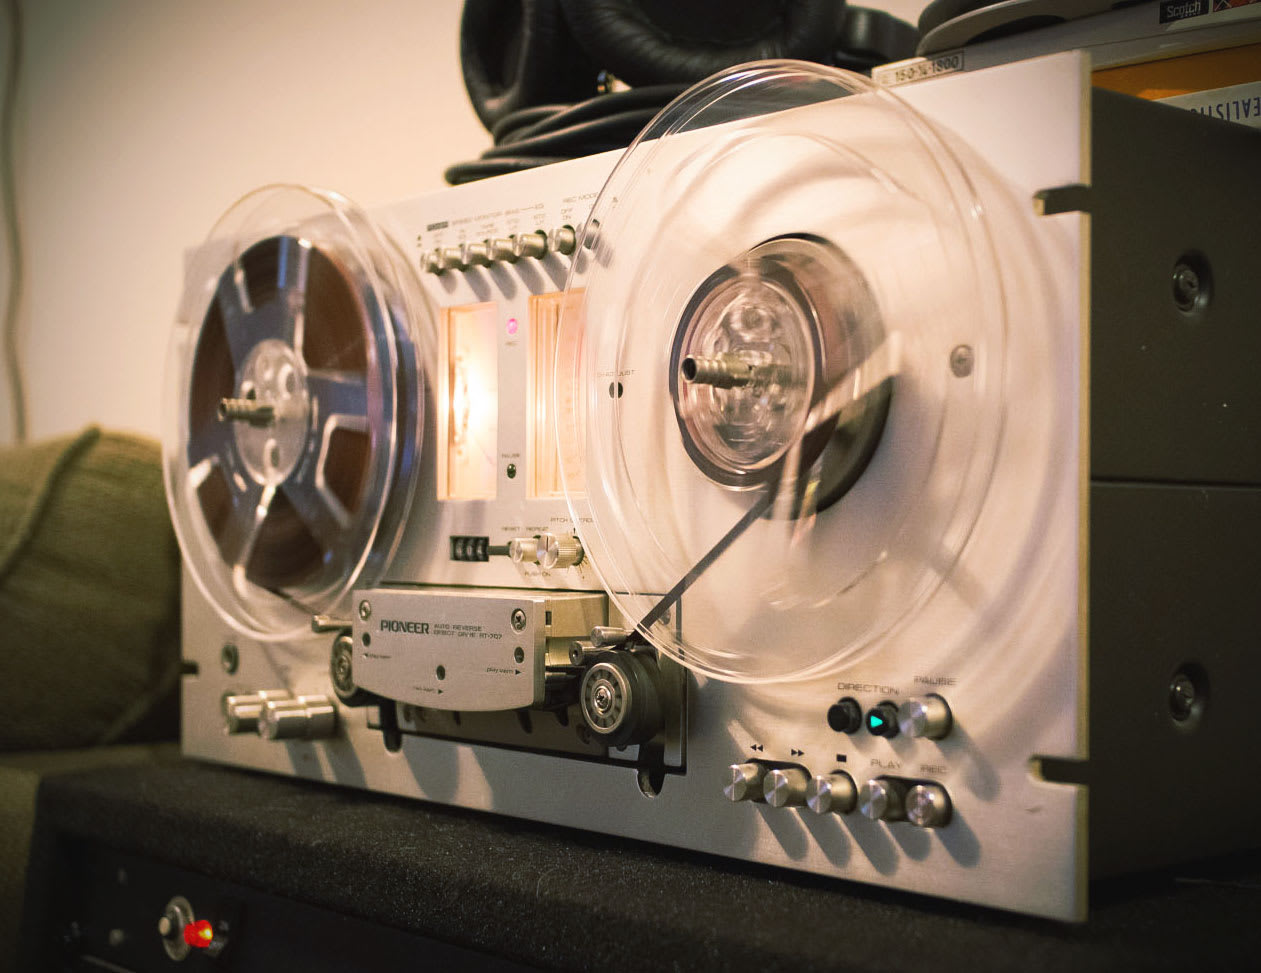 https://fiverr-res.cloudinary.com/images/q_auto,f_auto/gigs/2914697/original/TapeMachine2/record-your-music-through-a-reel-to-reel-analog-tape-machine.jpg